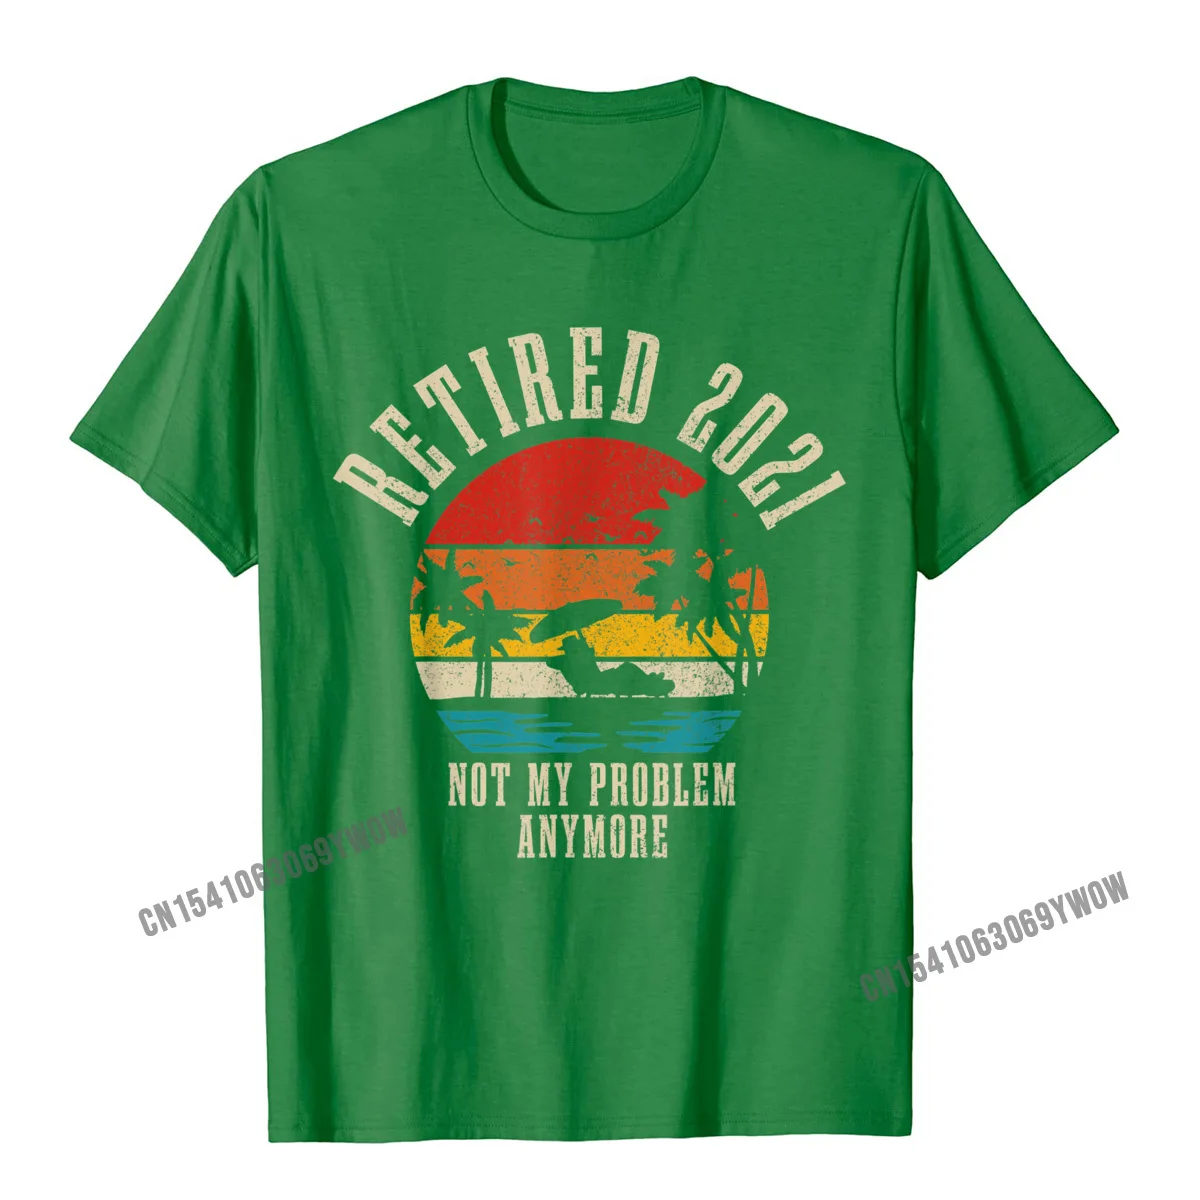 2021 Popular Men Tops T Shirt Fashionable Geek T-Shirt All Cotton Short Sleeve cosie T Shirt Crewneck Free Shipping Retired 2021 Not My Problem Anymore Vintage Retirement Gift T-Shirt__893 green